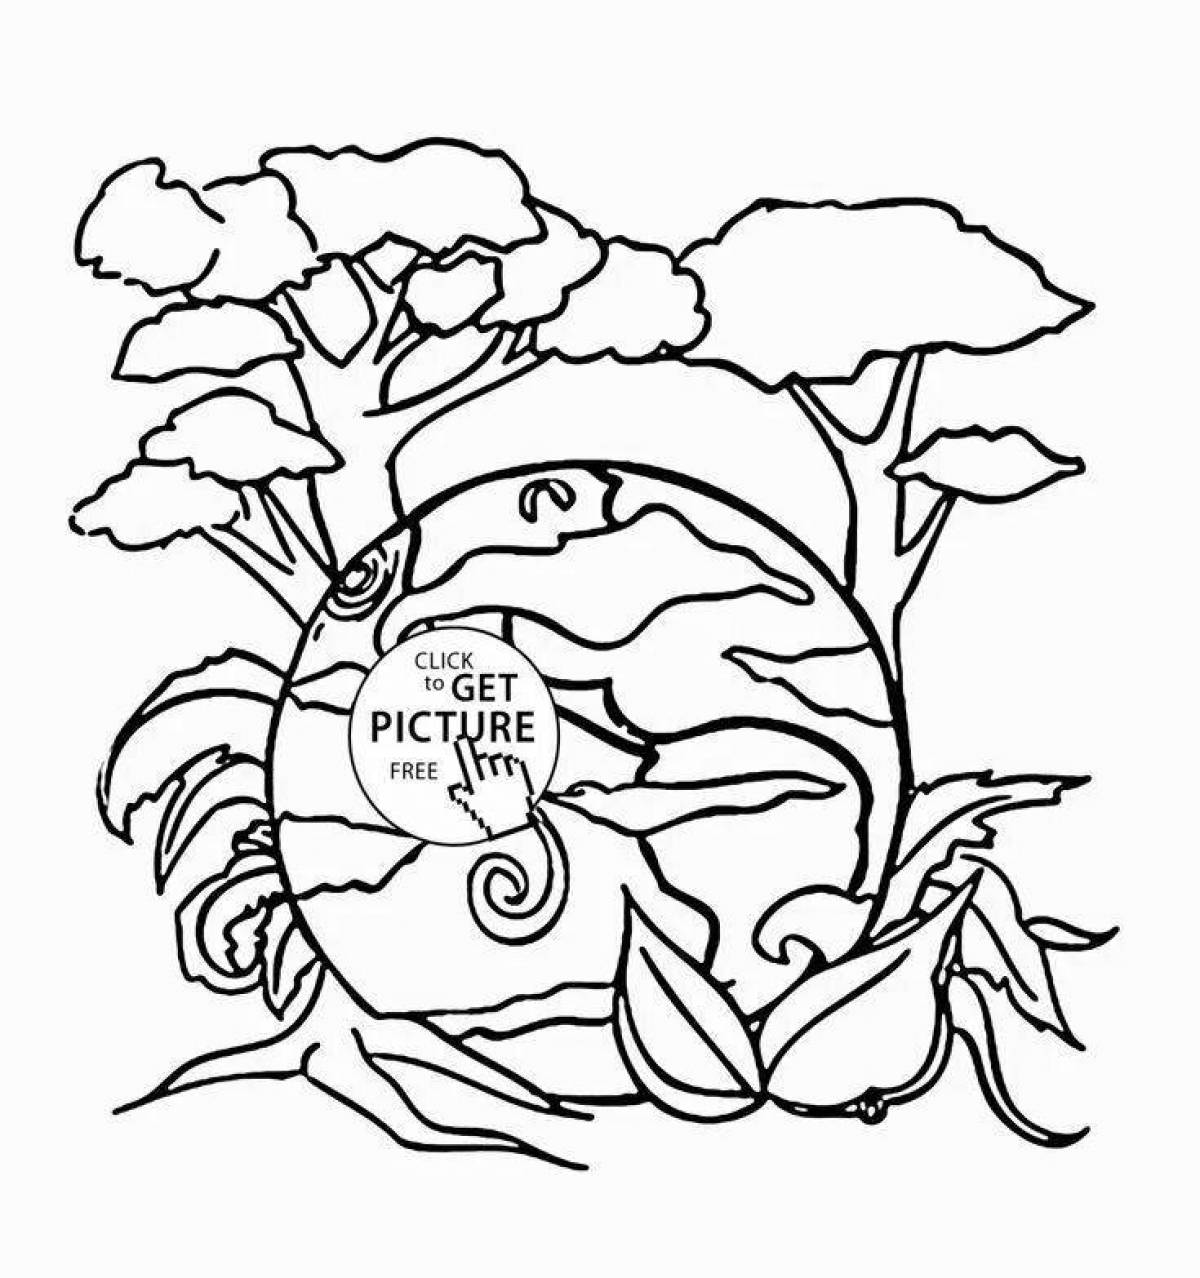 Sunny green friend coloring page